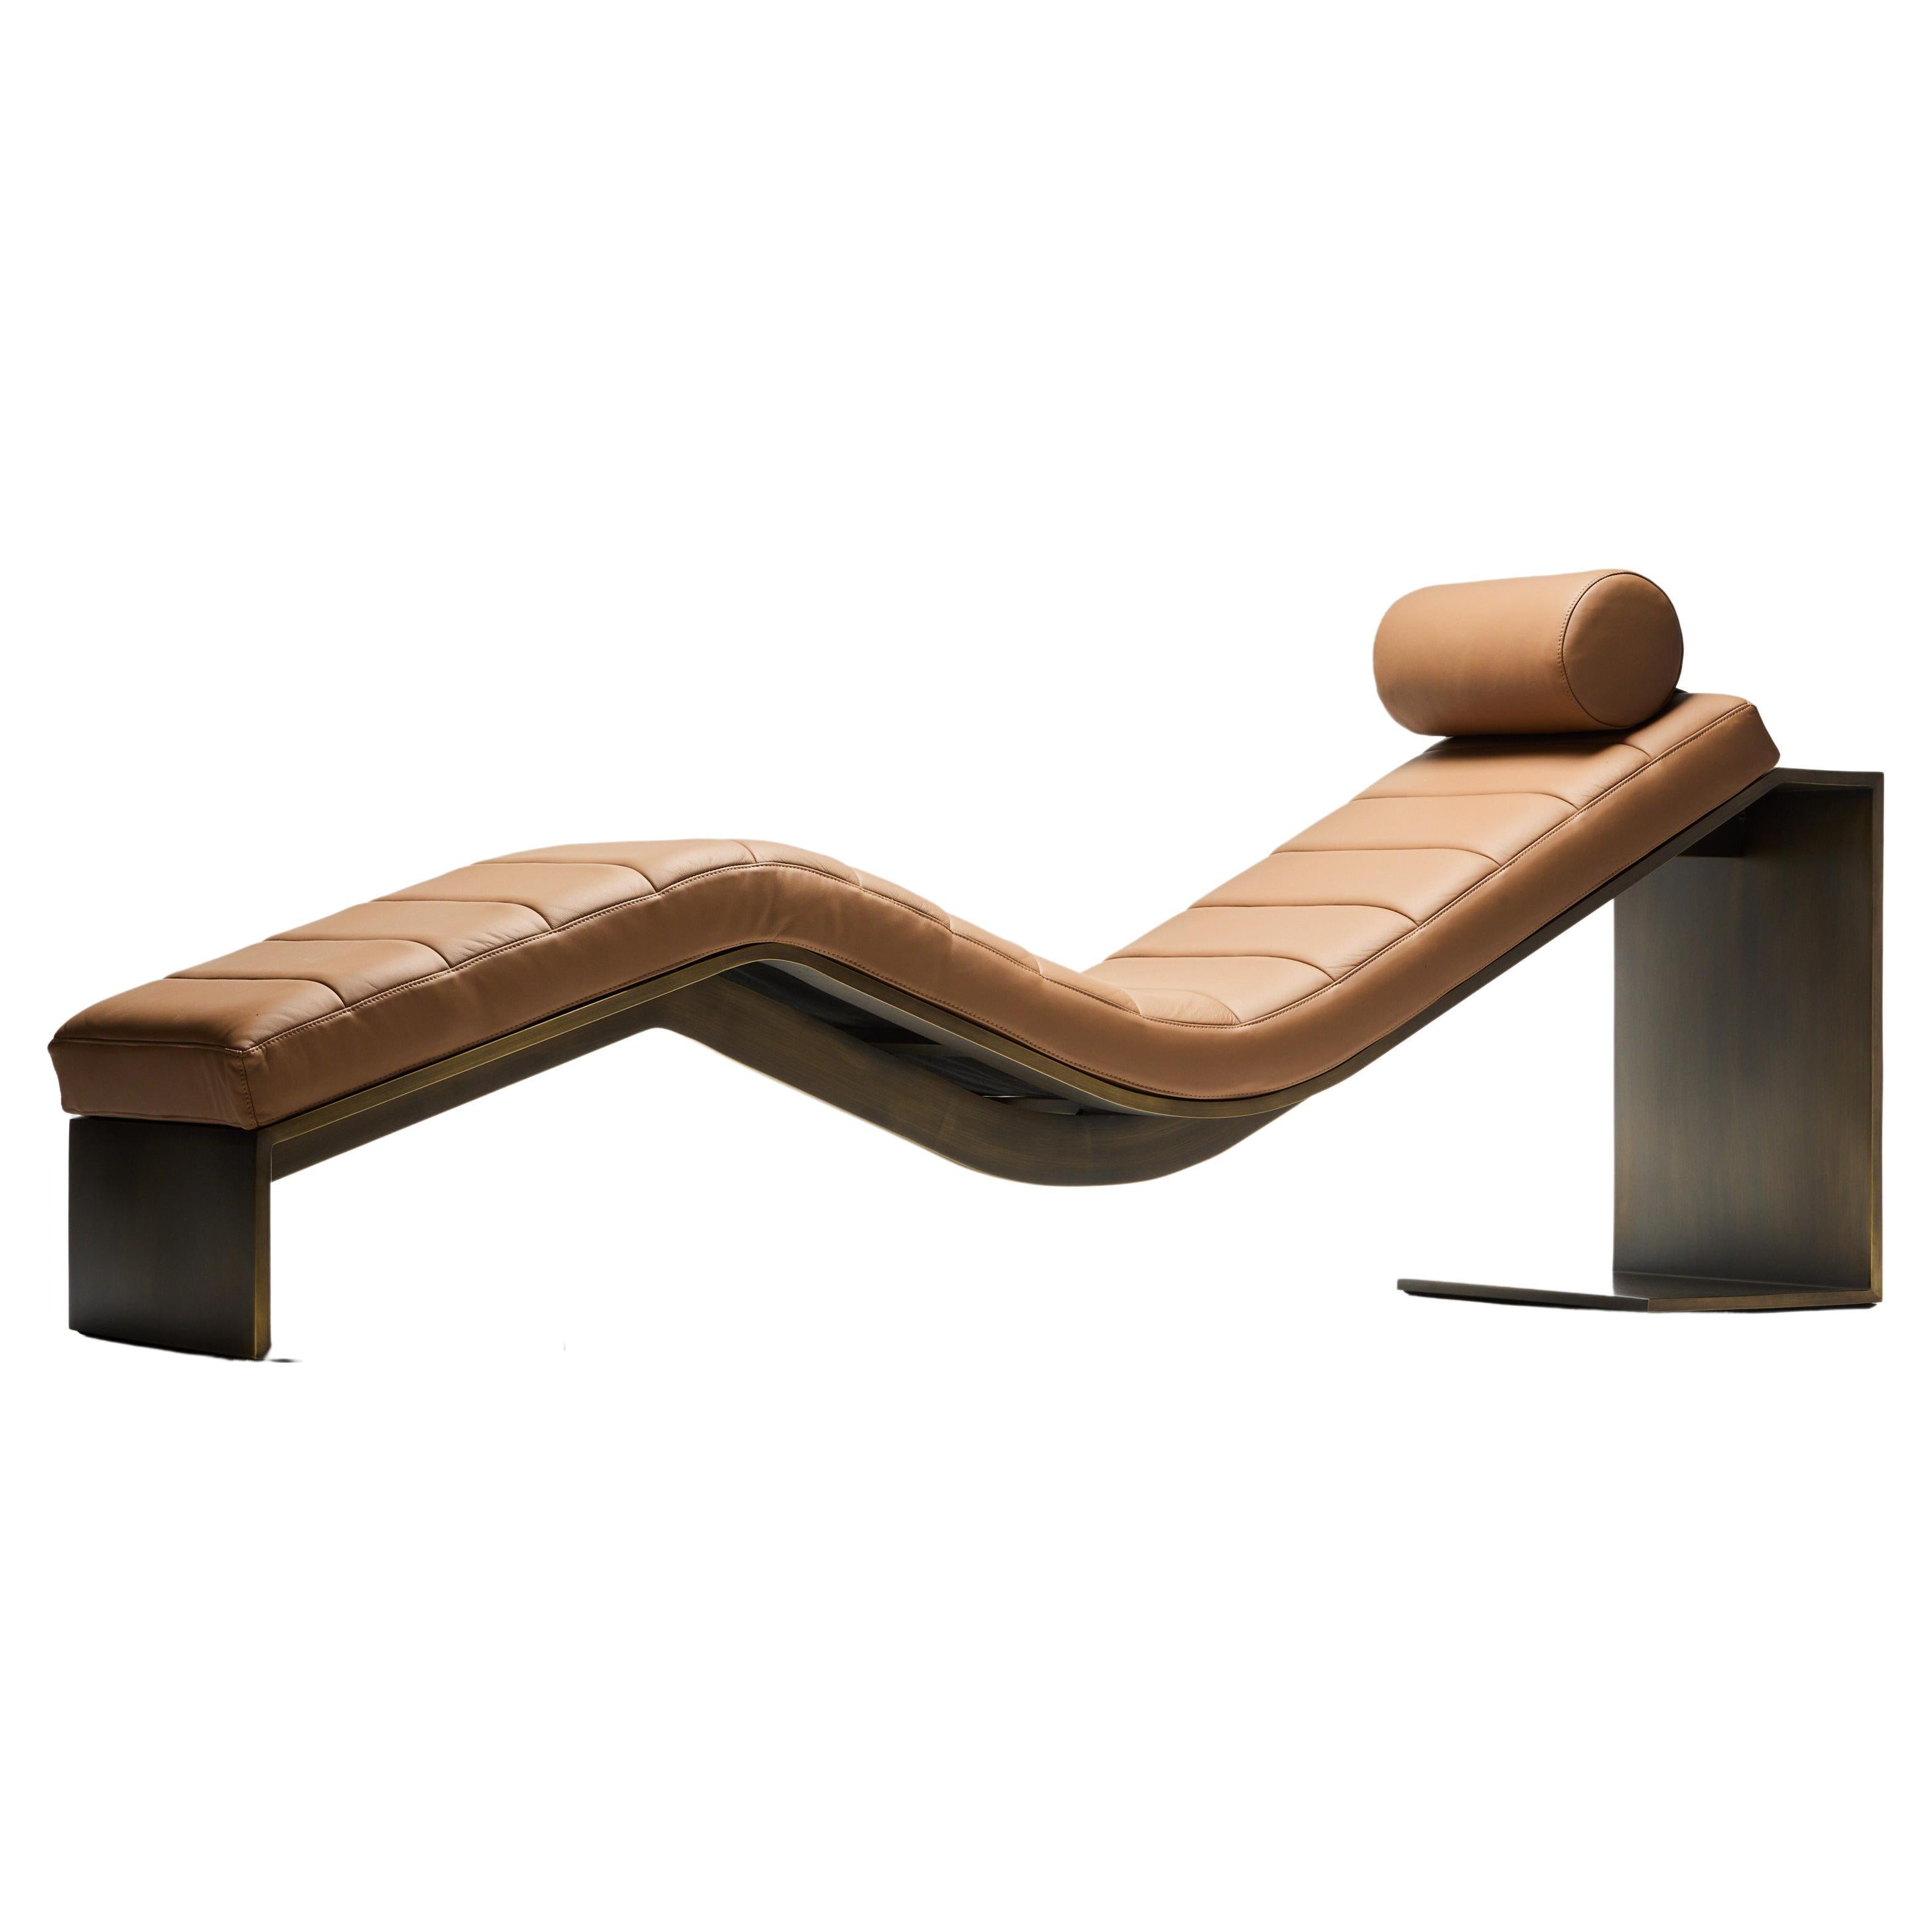 Bronze and Leather Bench, KIMANI Lounge by Reda Amalou, 2019, Gallery Collection For Sale